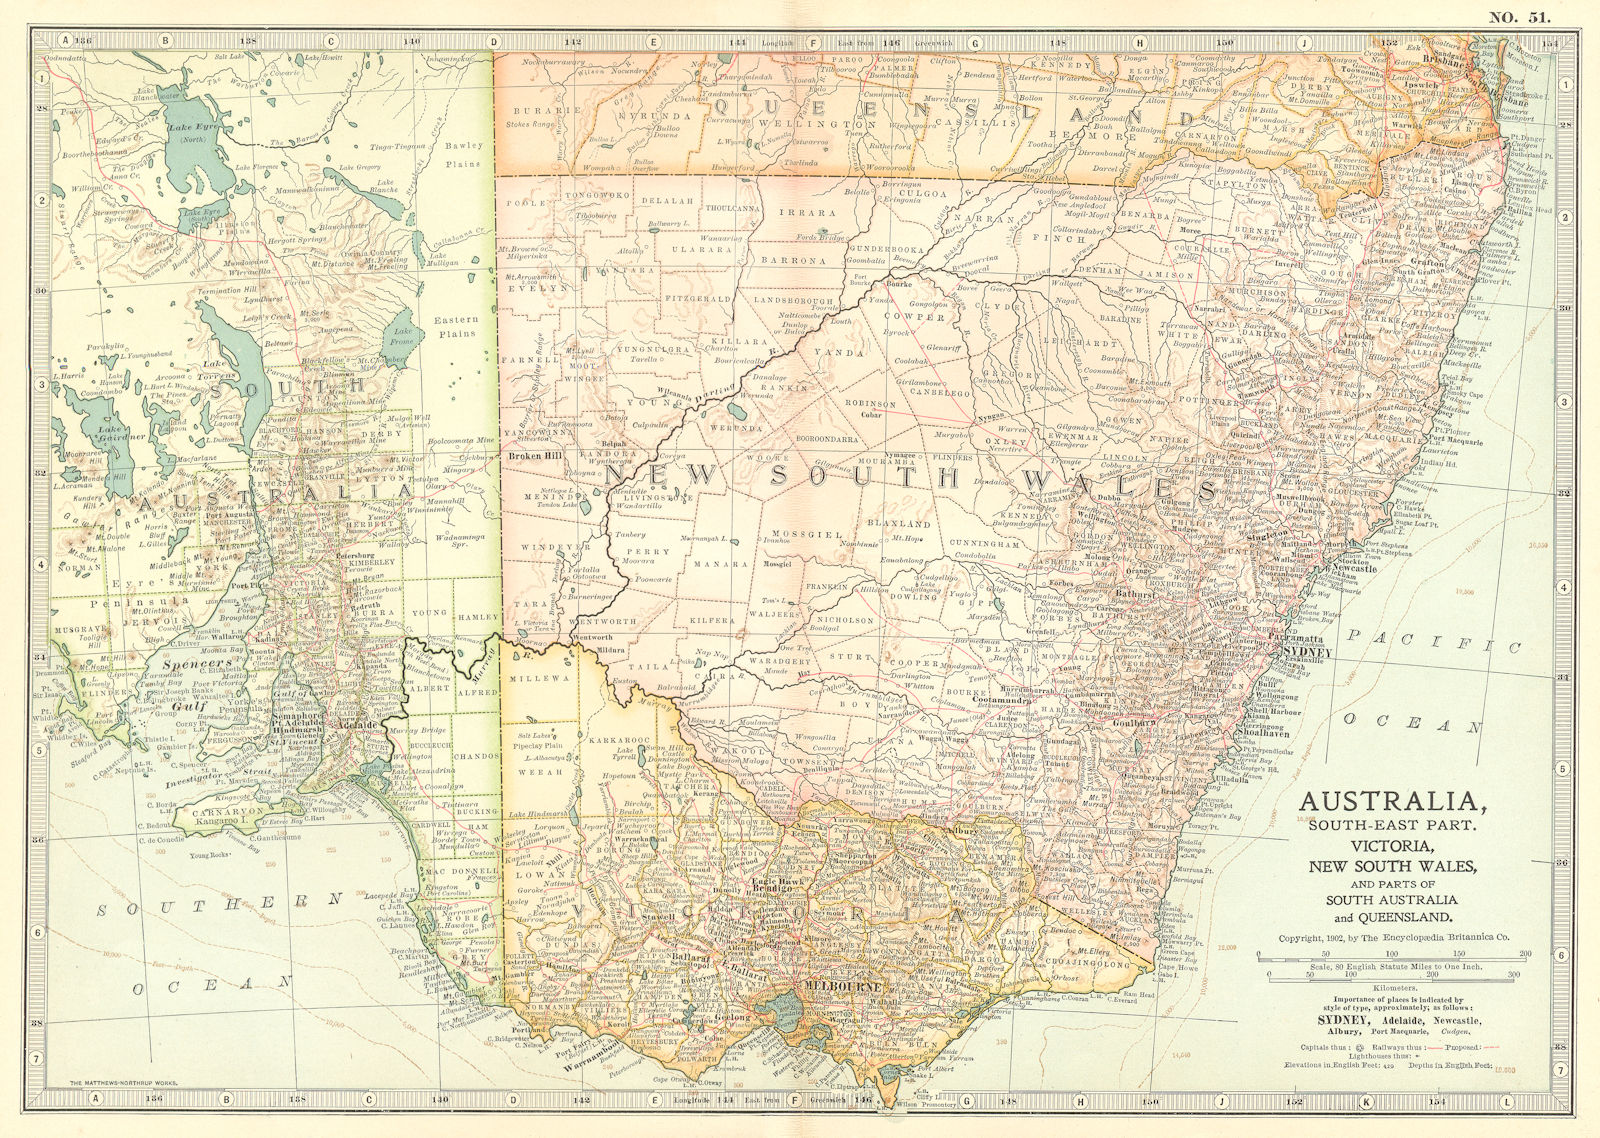 SOUTH EAST AUSTRALIA. Victoria, New South Wales, South Australia 1903 old map